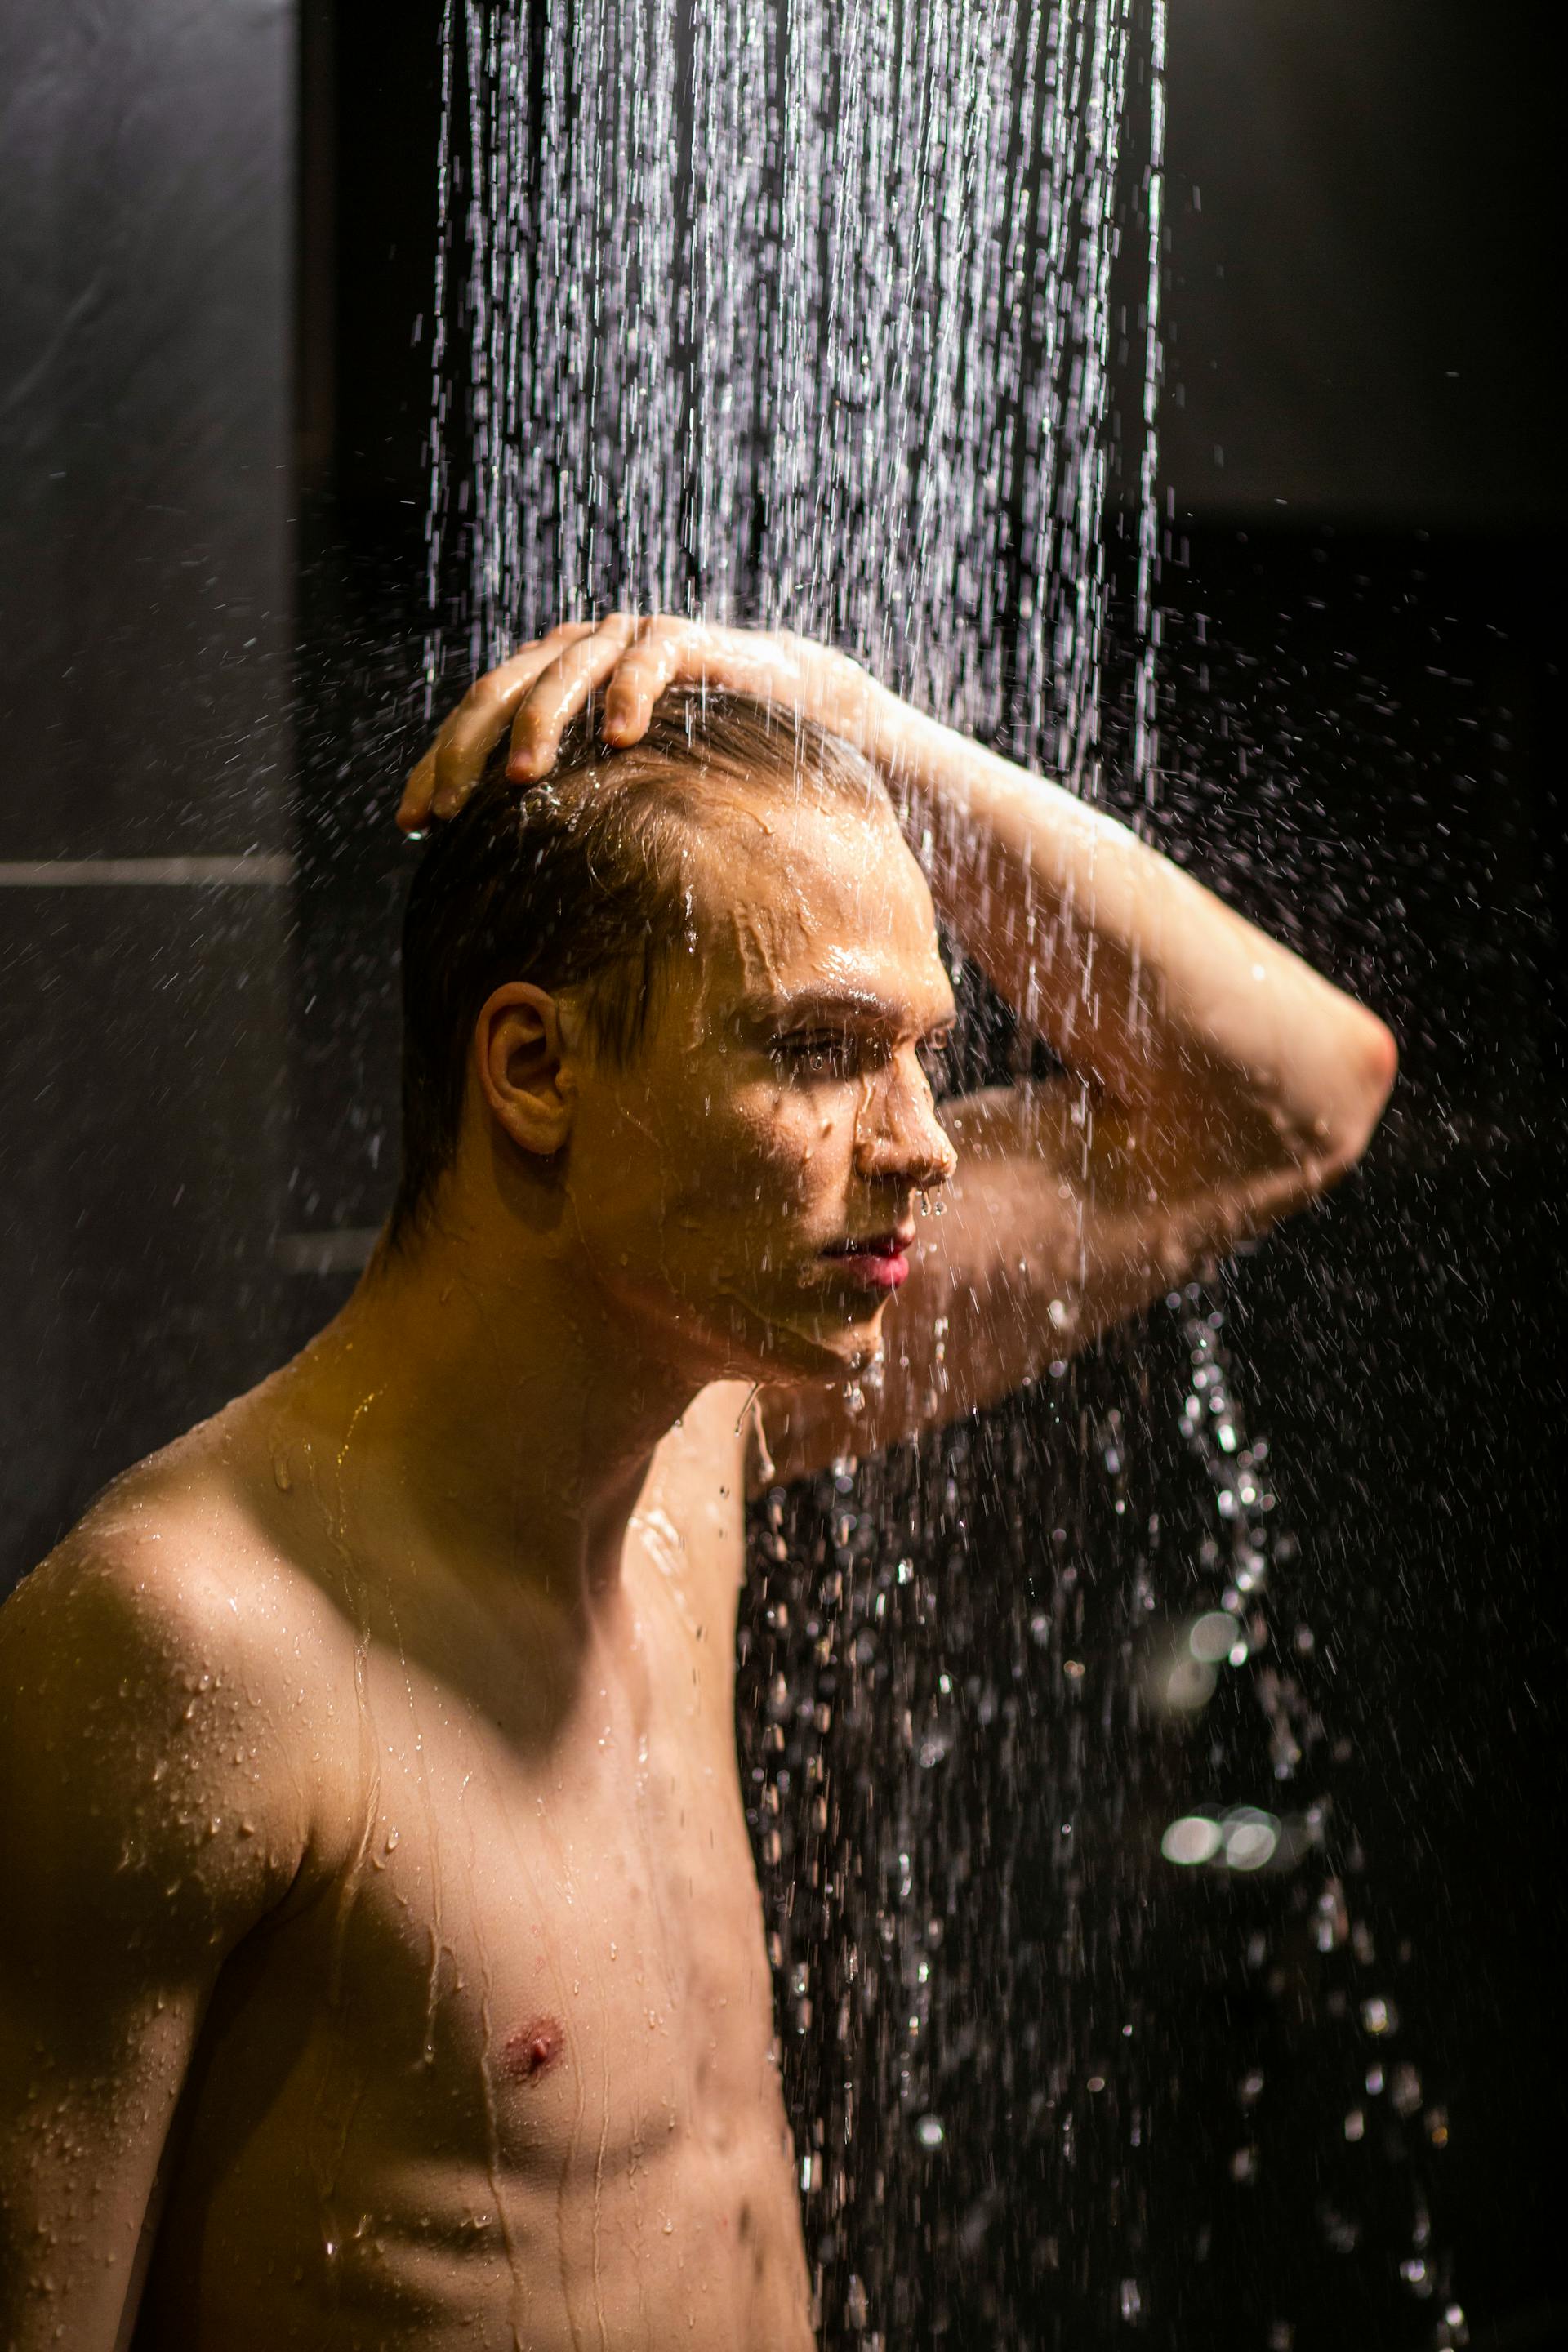 A man taking a relaxing shower | Source: Pexels